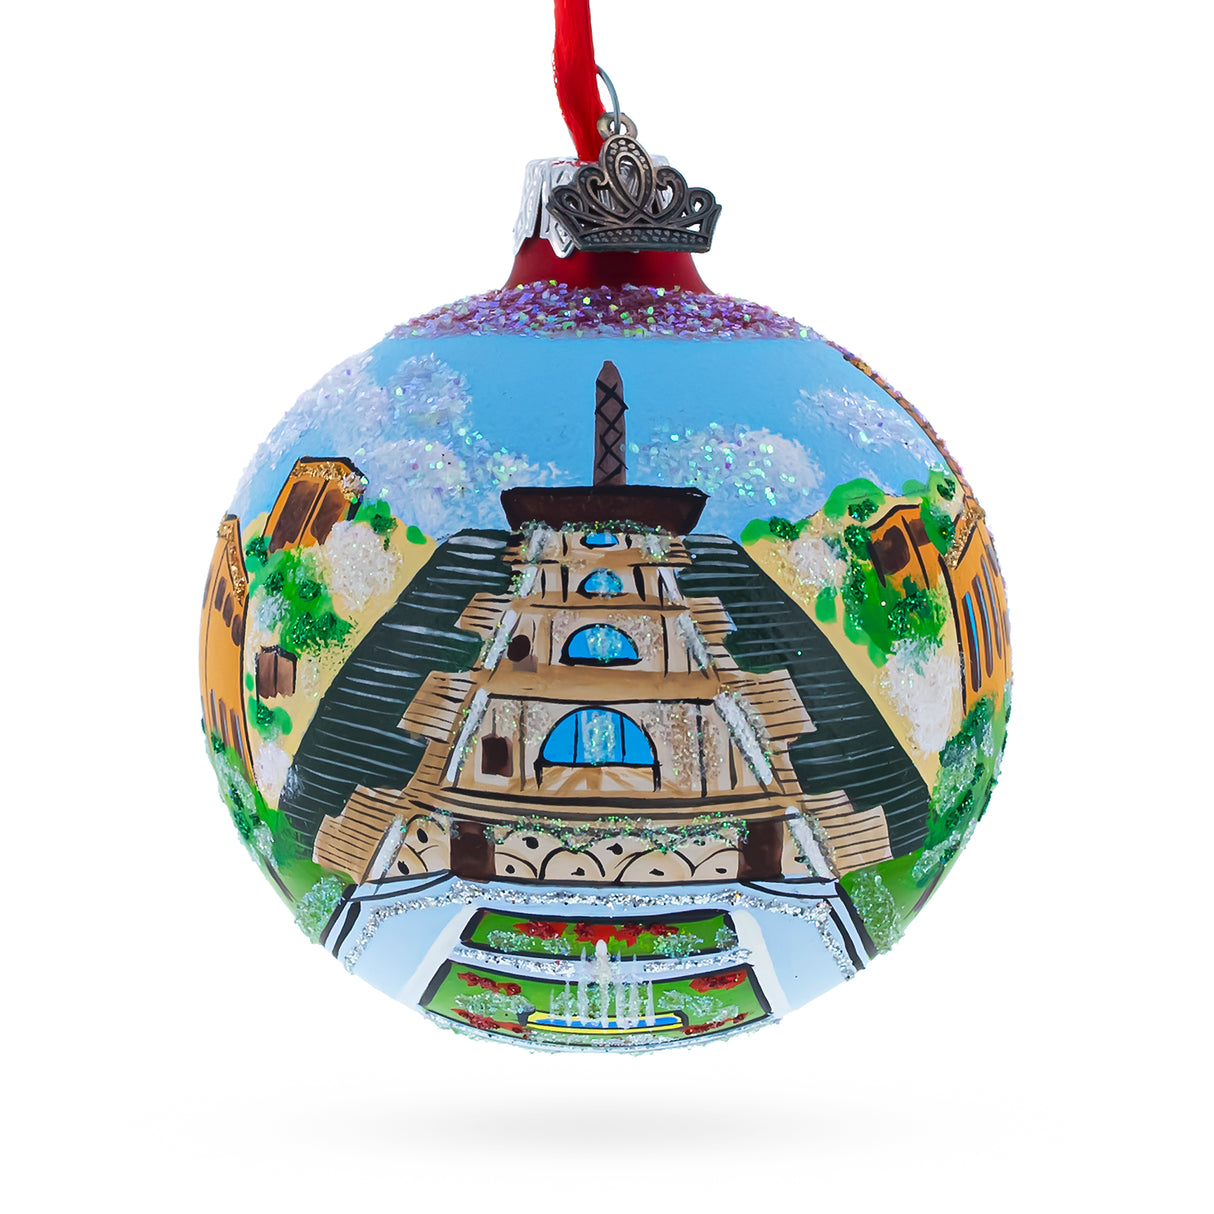 Glass Cafesjian Center for the Arts, Yerevan, Armenia Glass Ball Christmas Ornament 3.25 Inches in Multi color Round